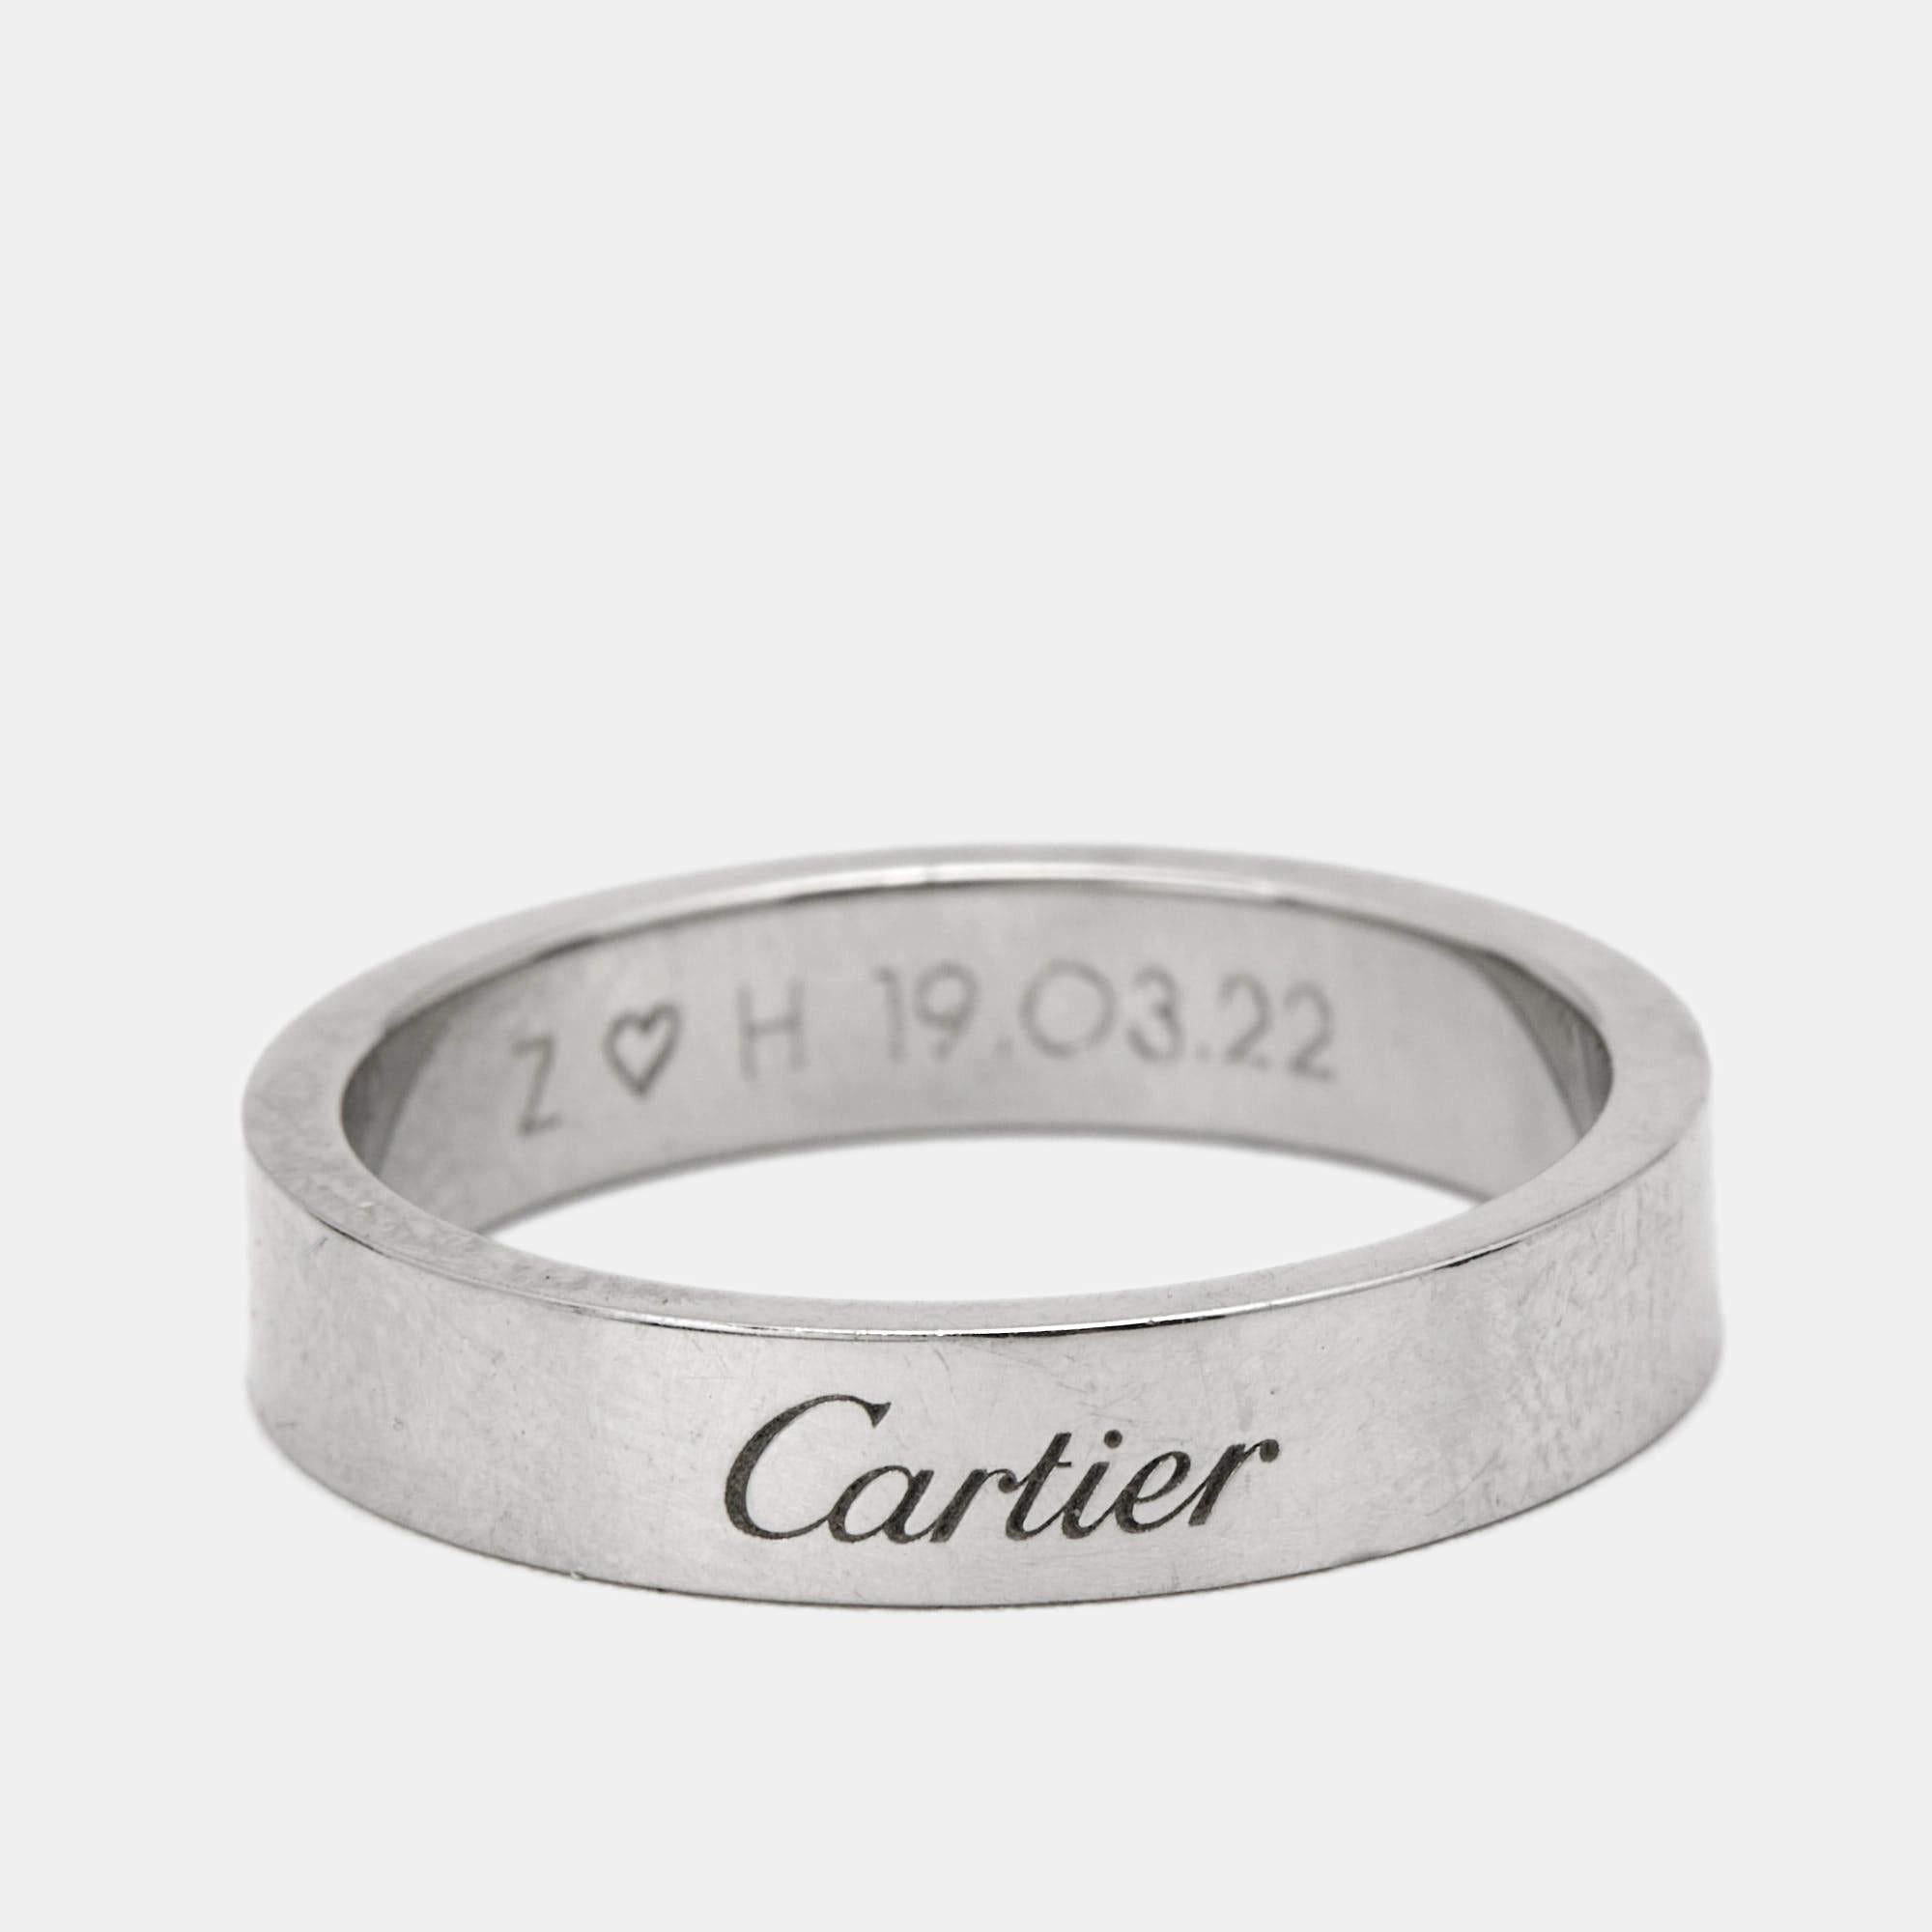 Let this C de Cartier band ring be a favored choice when it comes to choosing a ring for daily wear. The ring is made from platinum and is highlighted by brand engravings. It will be a prized accessory you will love wearing every day.

Includes: